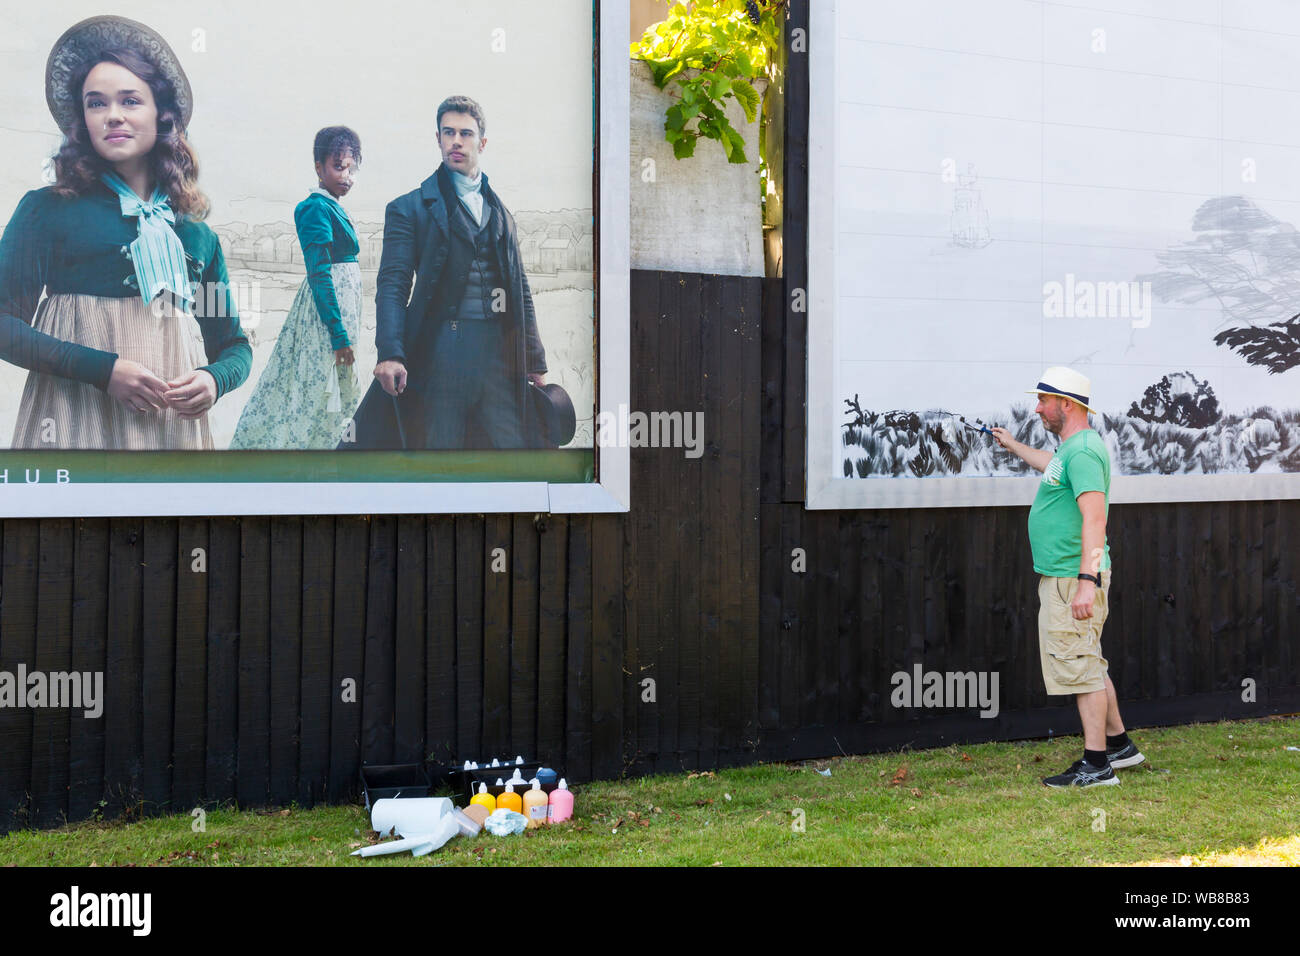 Bournemouth, Dorset UK. 25th August 2019. British artist David Downes has been commissioned by ITV to create a large scale mural to launch their new drama Sanditon, based on the unfinished novel by Jane Austen. The mural of the fictional town of Sanditon will be 12 metres wide and is being painted over 5 days starting today ahead of the first episode of Sanditon on TV this evening; the mural will then be on display for 3 weeks. Credit: Carolyn Jenkins/Alamy Live News Stock Photo